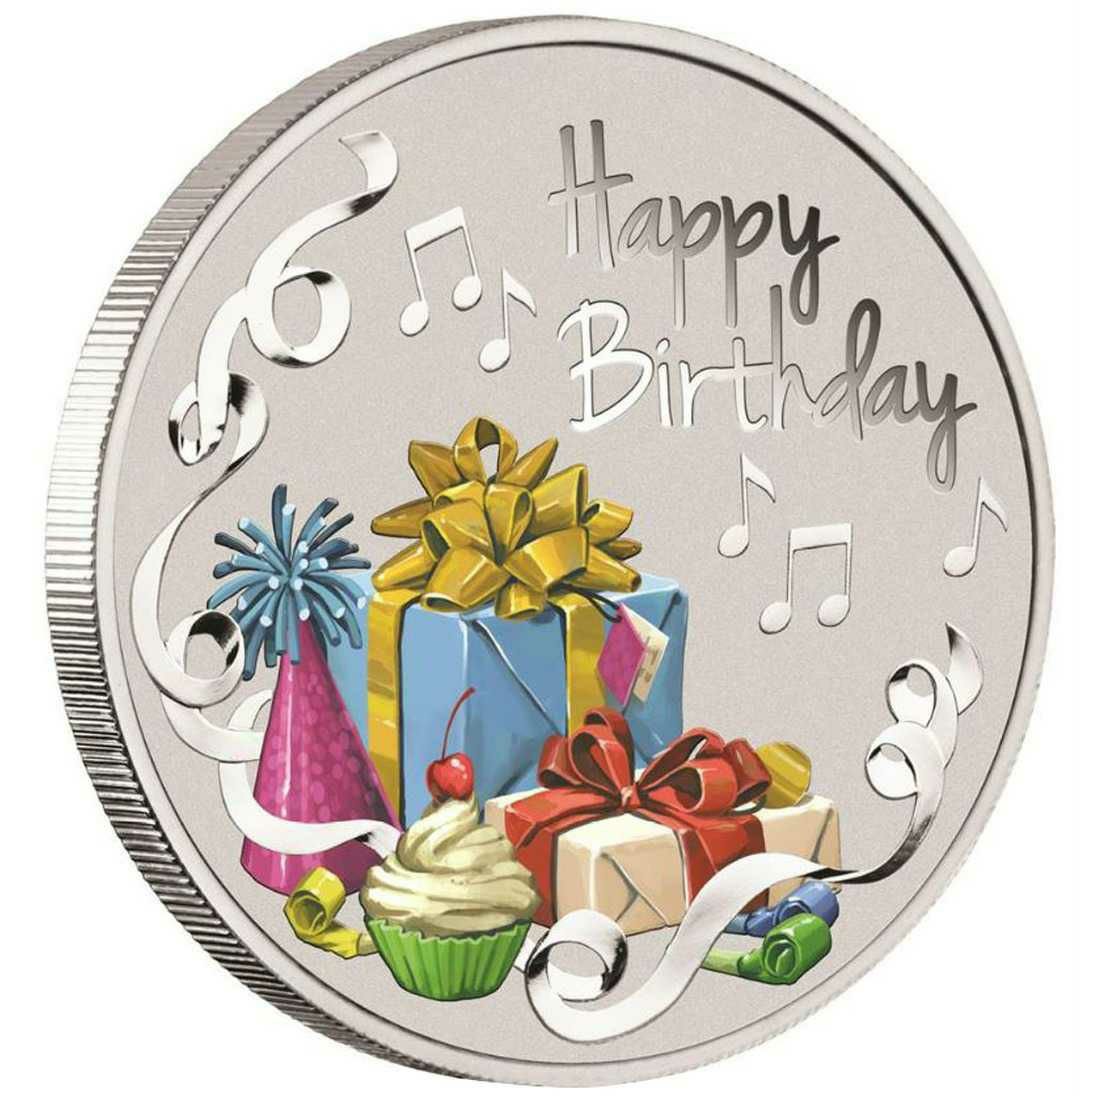 999 Happy Birthday Coloring Gift Round Coin Ms-3334